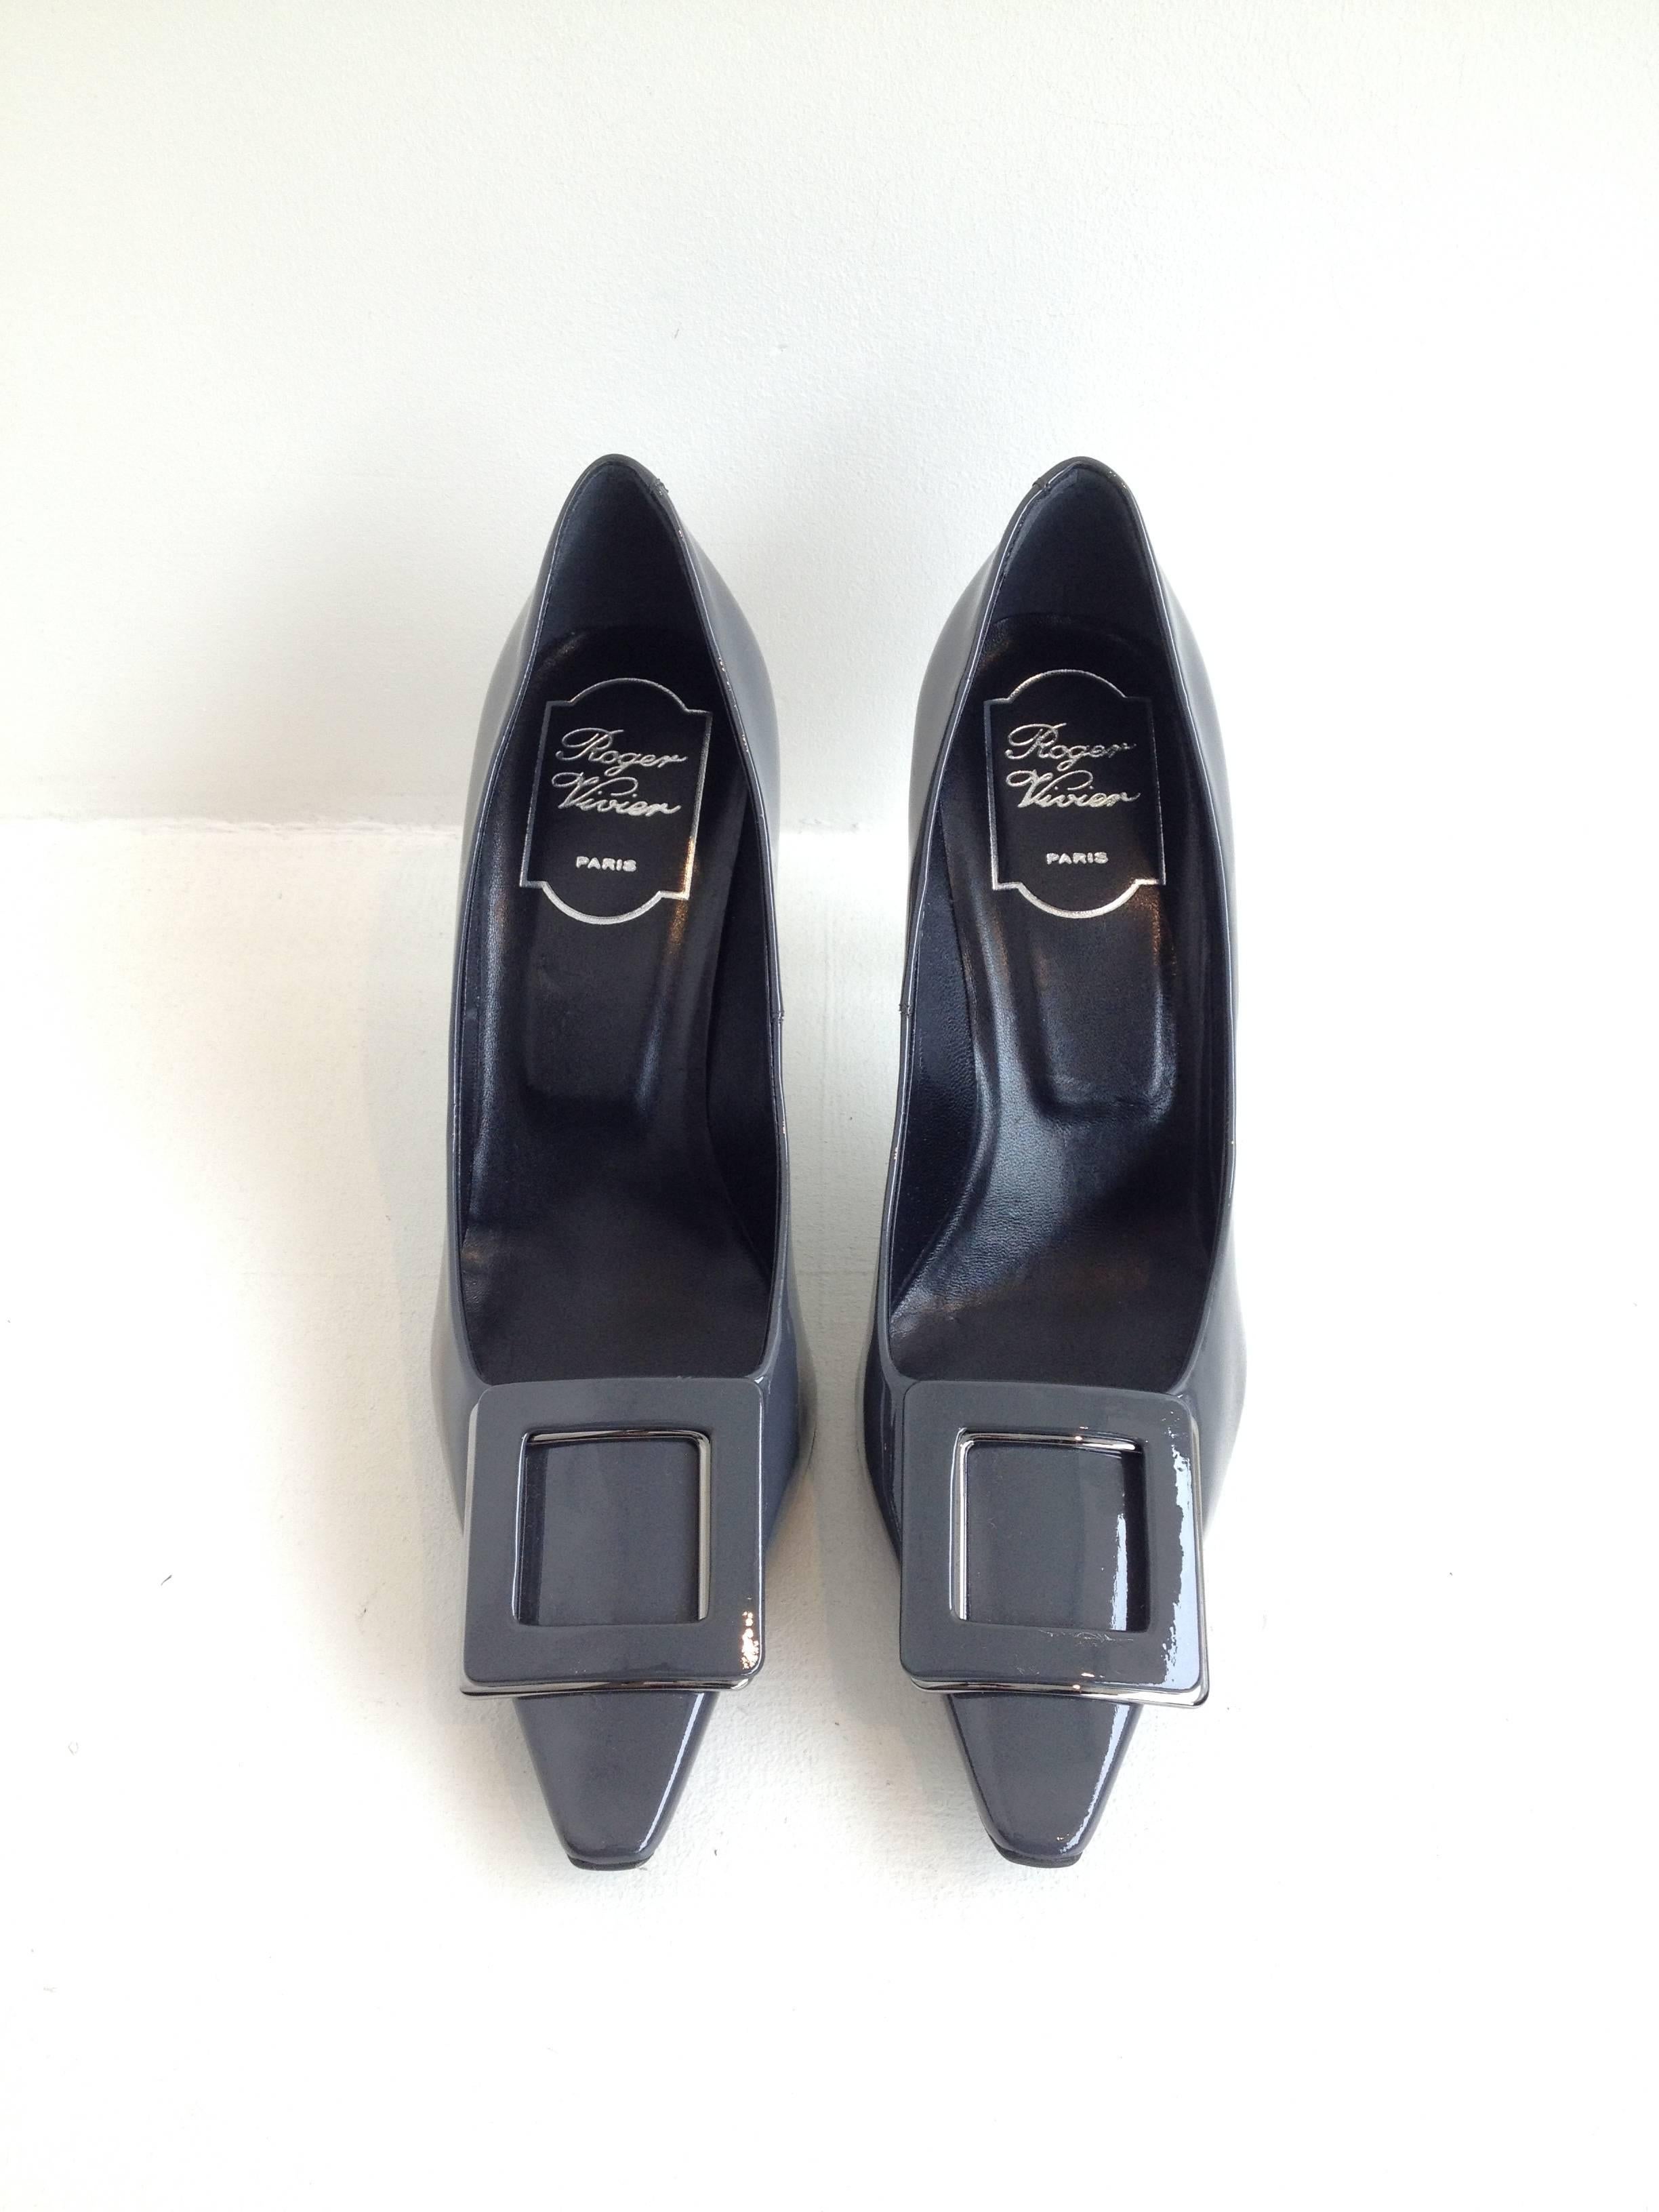 This classic Roger Vivier buckle always manages to feel current, thanks to the designer's constant updates to their shoes. This one is ultra pointy and has a gorgeous very slightly curved three inch heel. The dark steel grey patent is modern, while